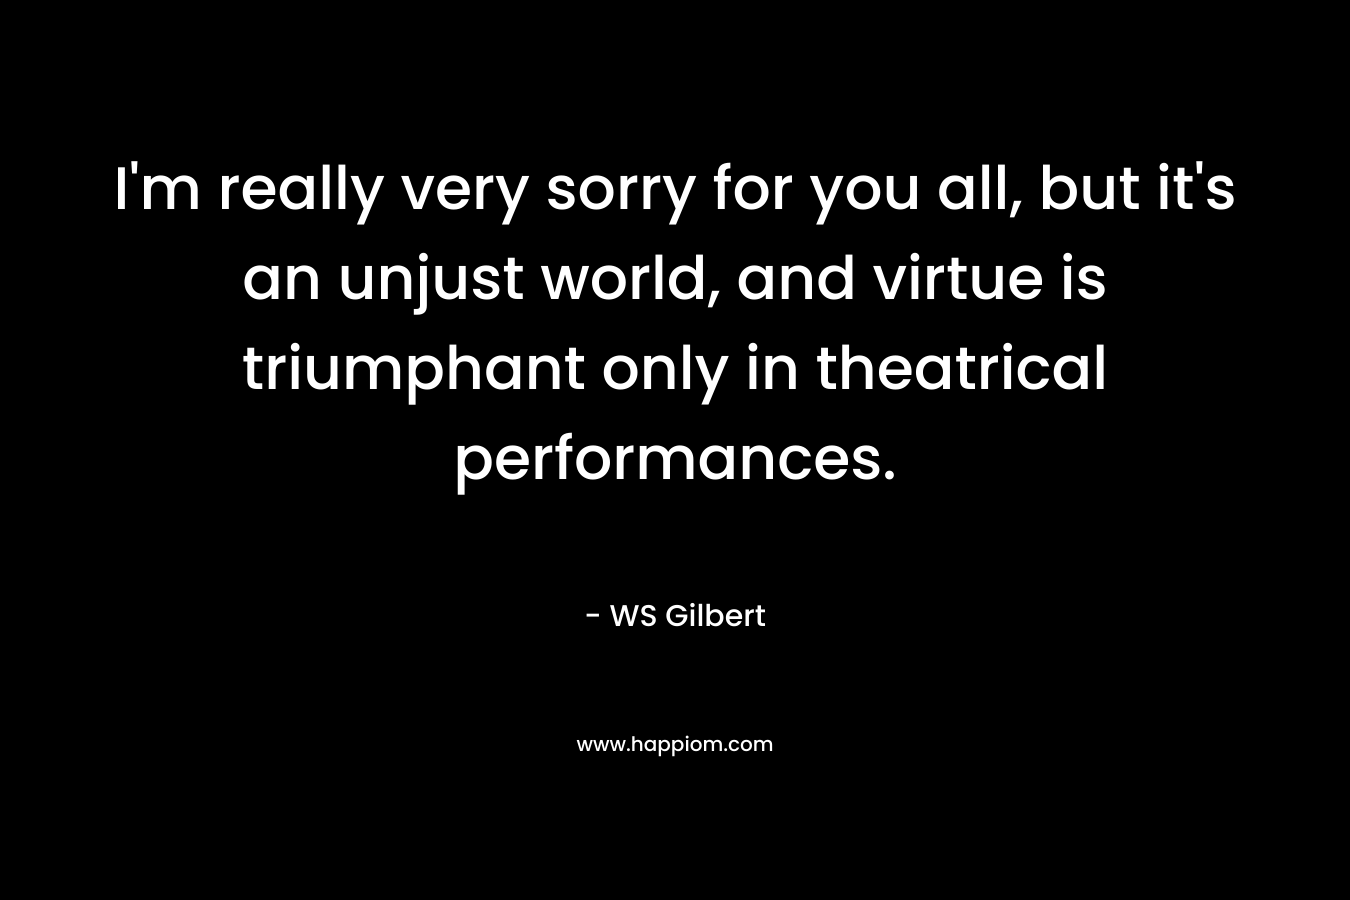 I'm really very sorry for you all, but it's an unjust world, and virtue is triumphant only in theatrical performances.